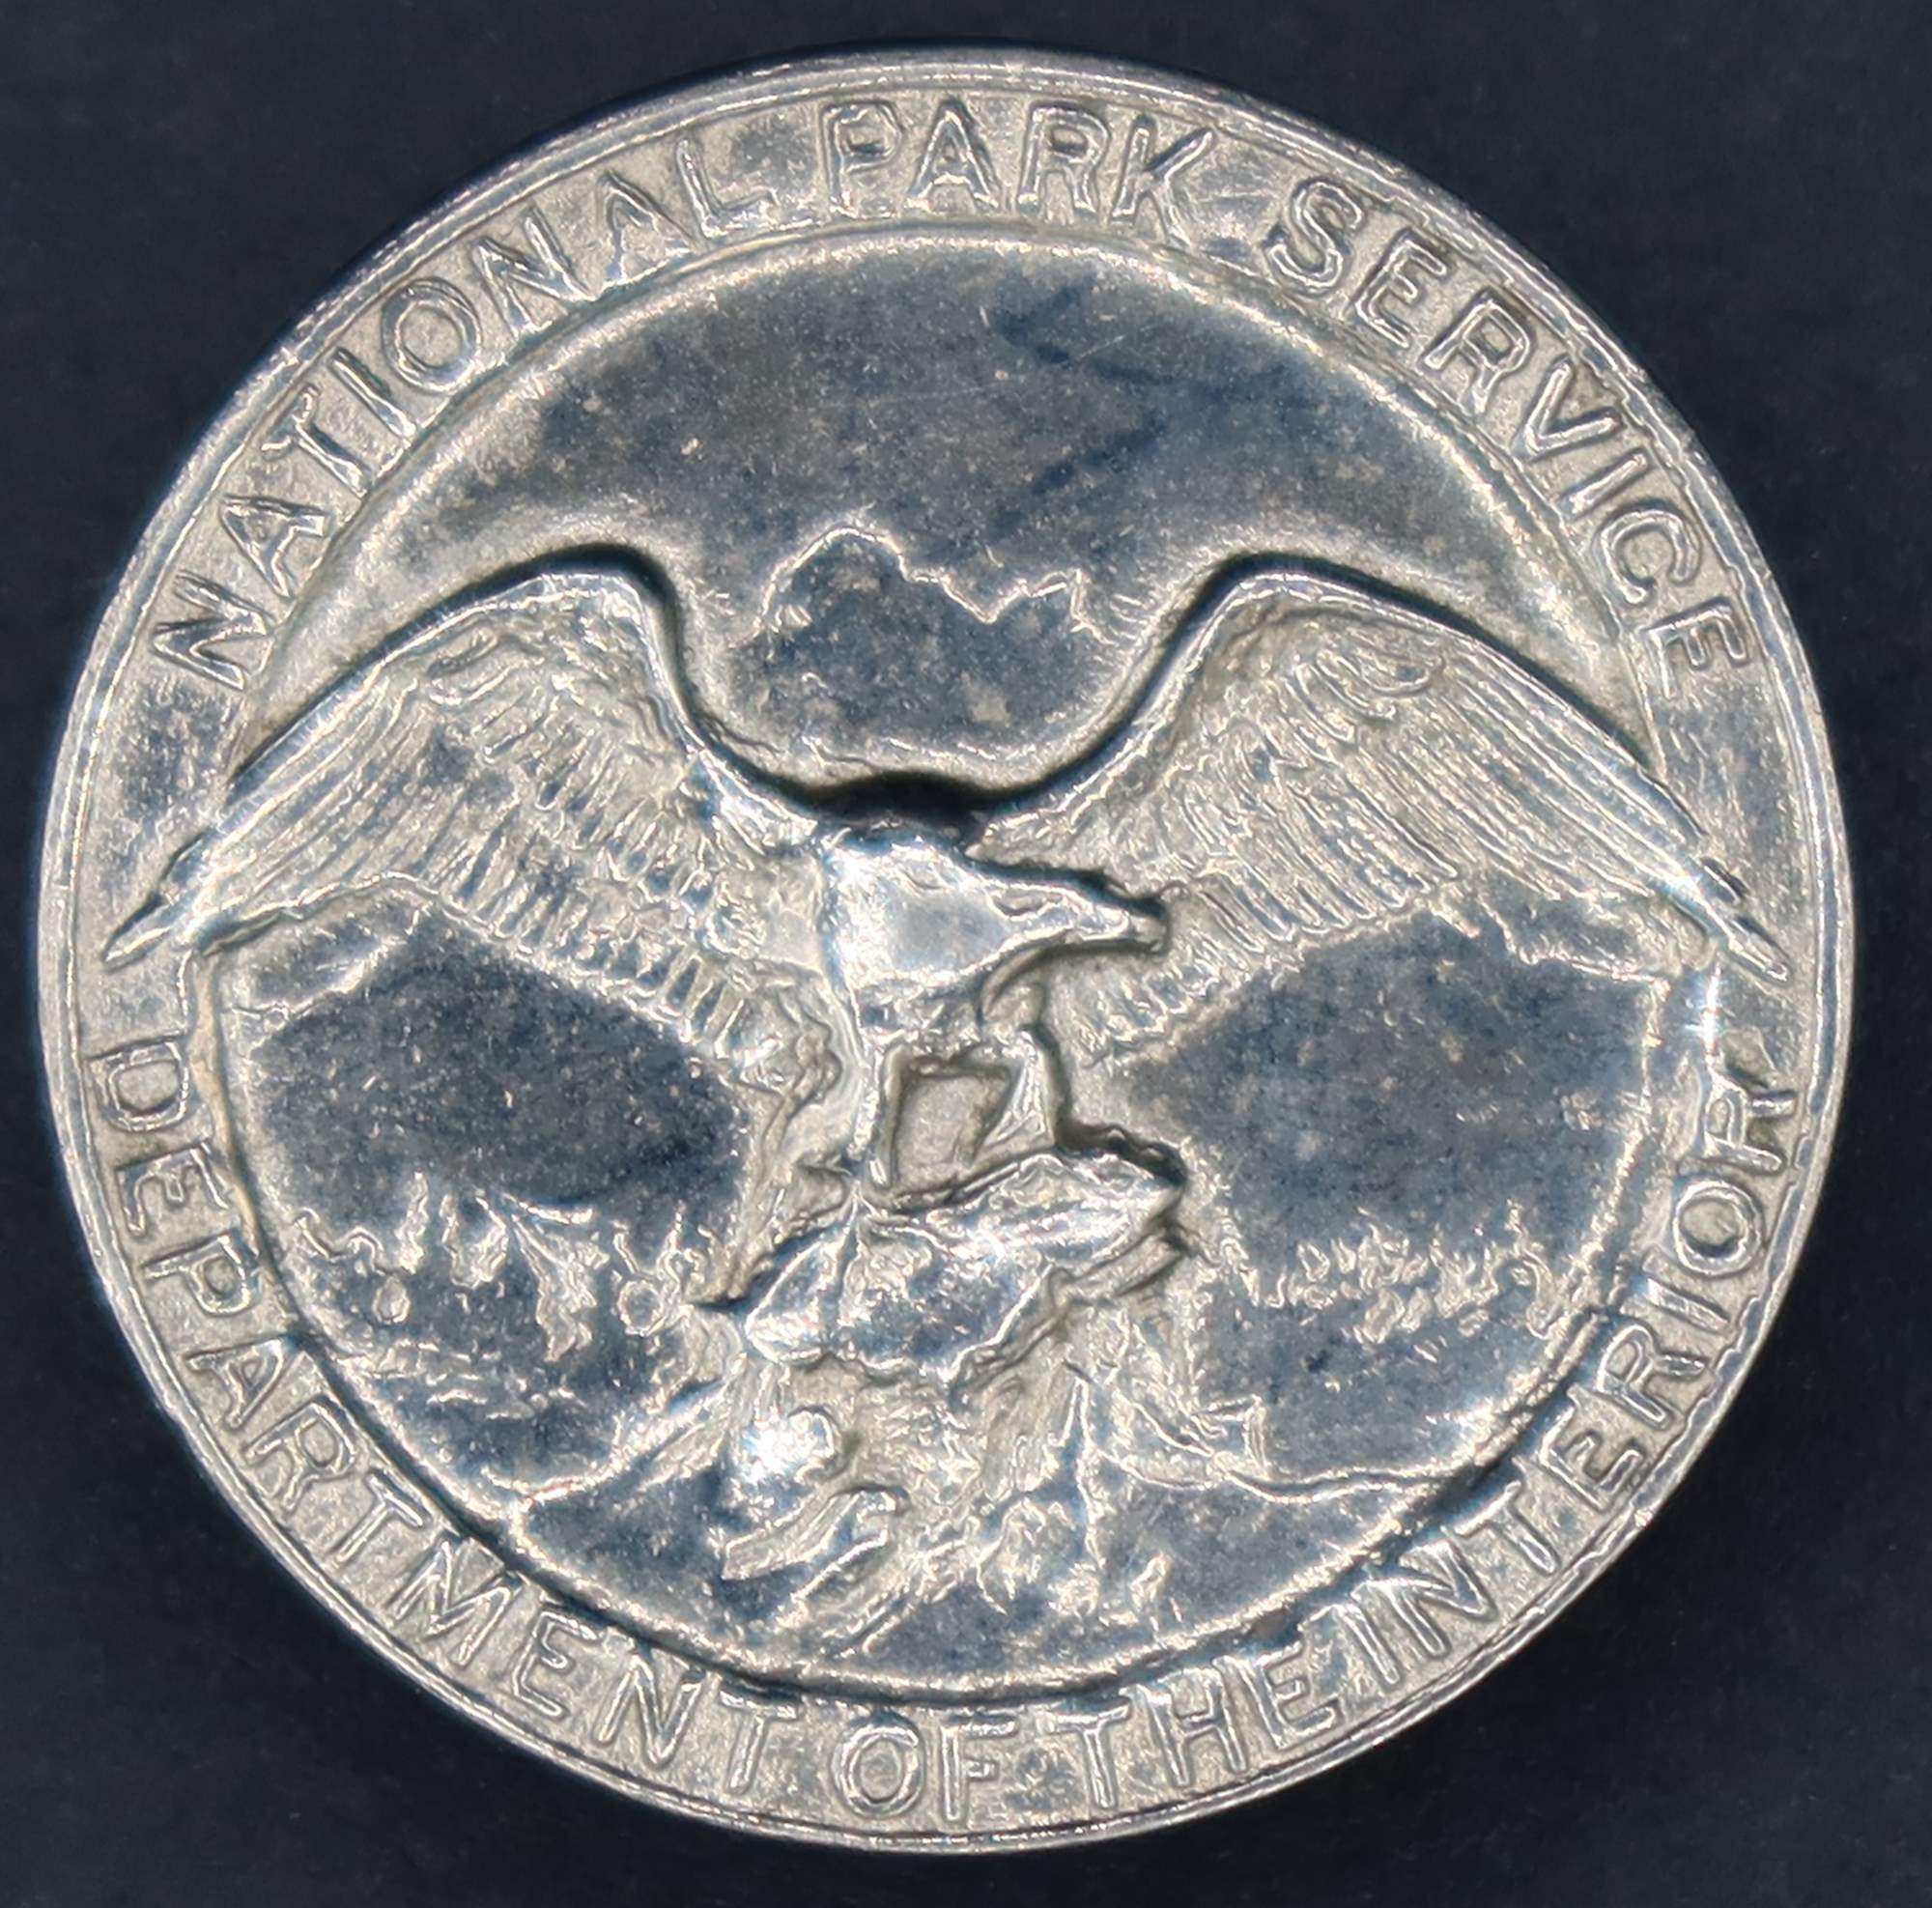 Round silver badge with National Park Service Department of the Interior around the rim and an eagle looking to its left in the middle.